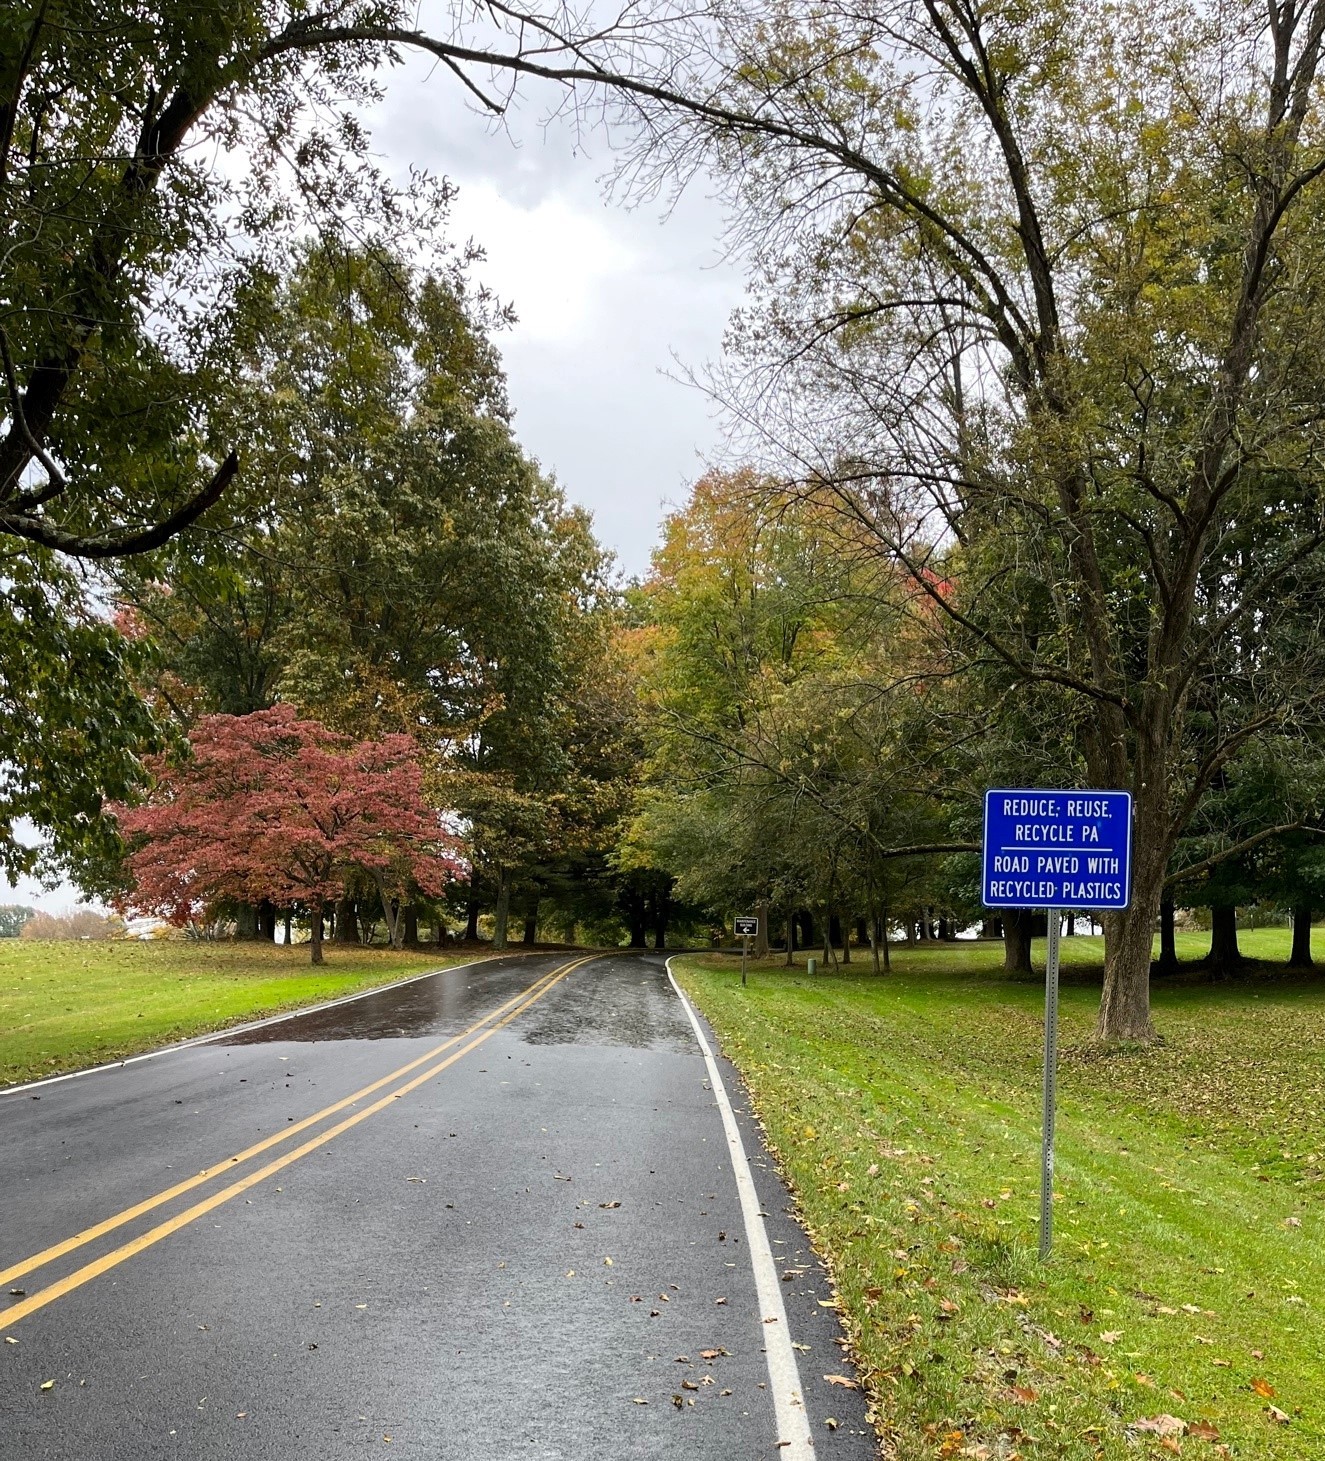 Ridley Creek State Park road with a sign announcing that it was paved with recycled plastic.